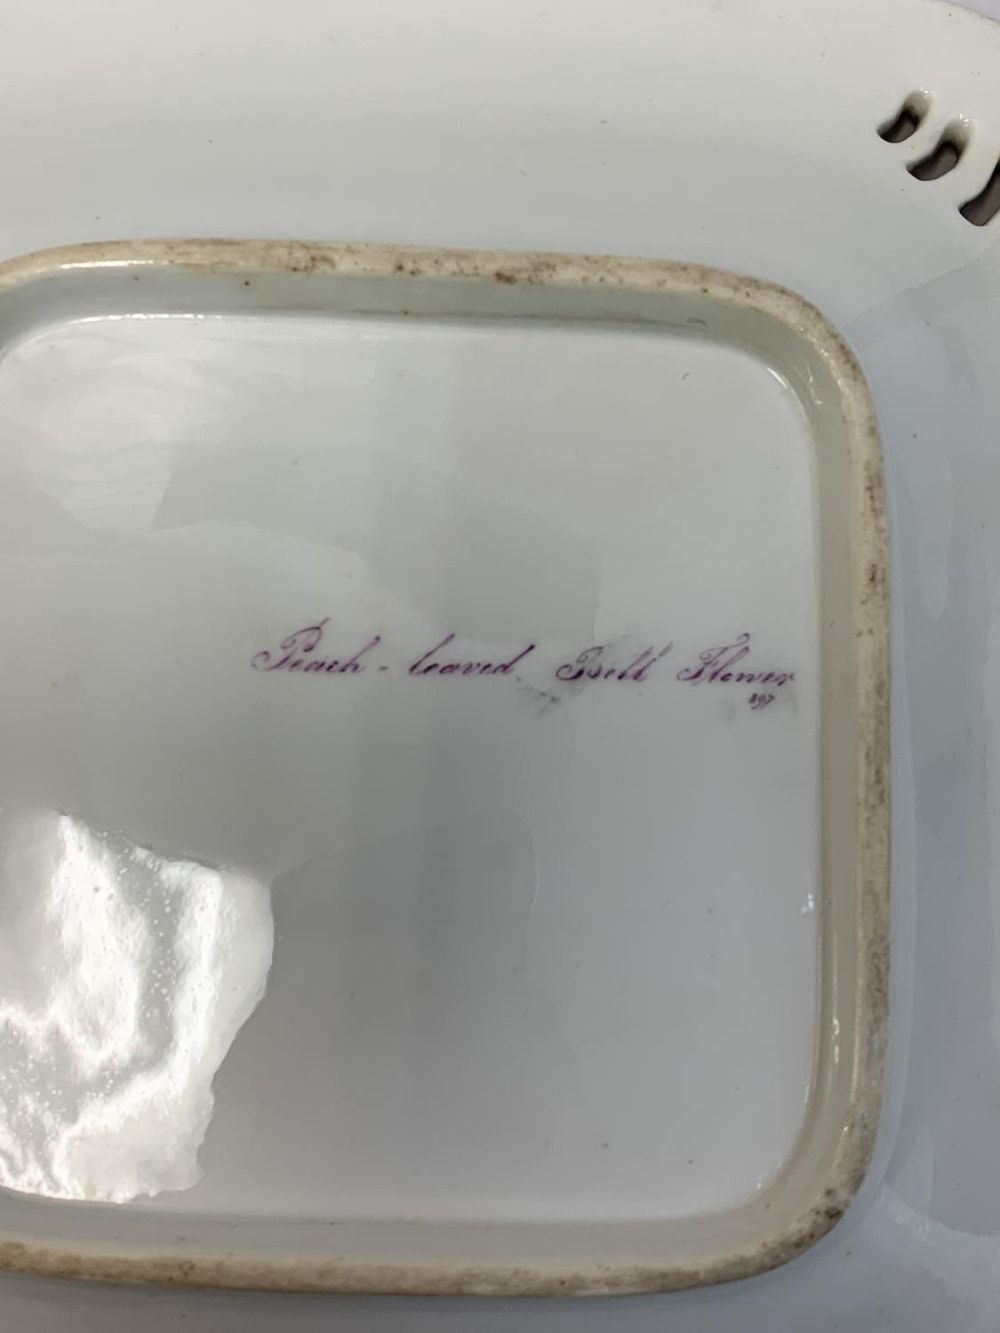 H&R Daniel Shell Pierced Shape Serving Dish in Good Condition. - Image 3 of 3